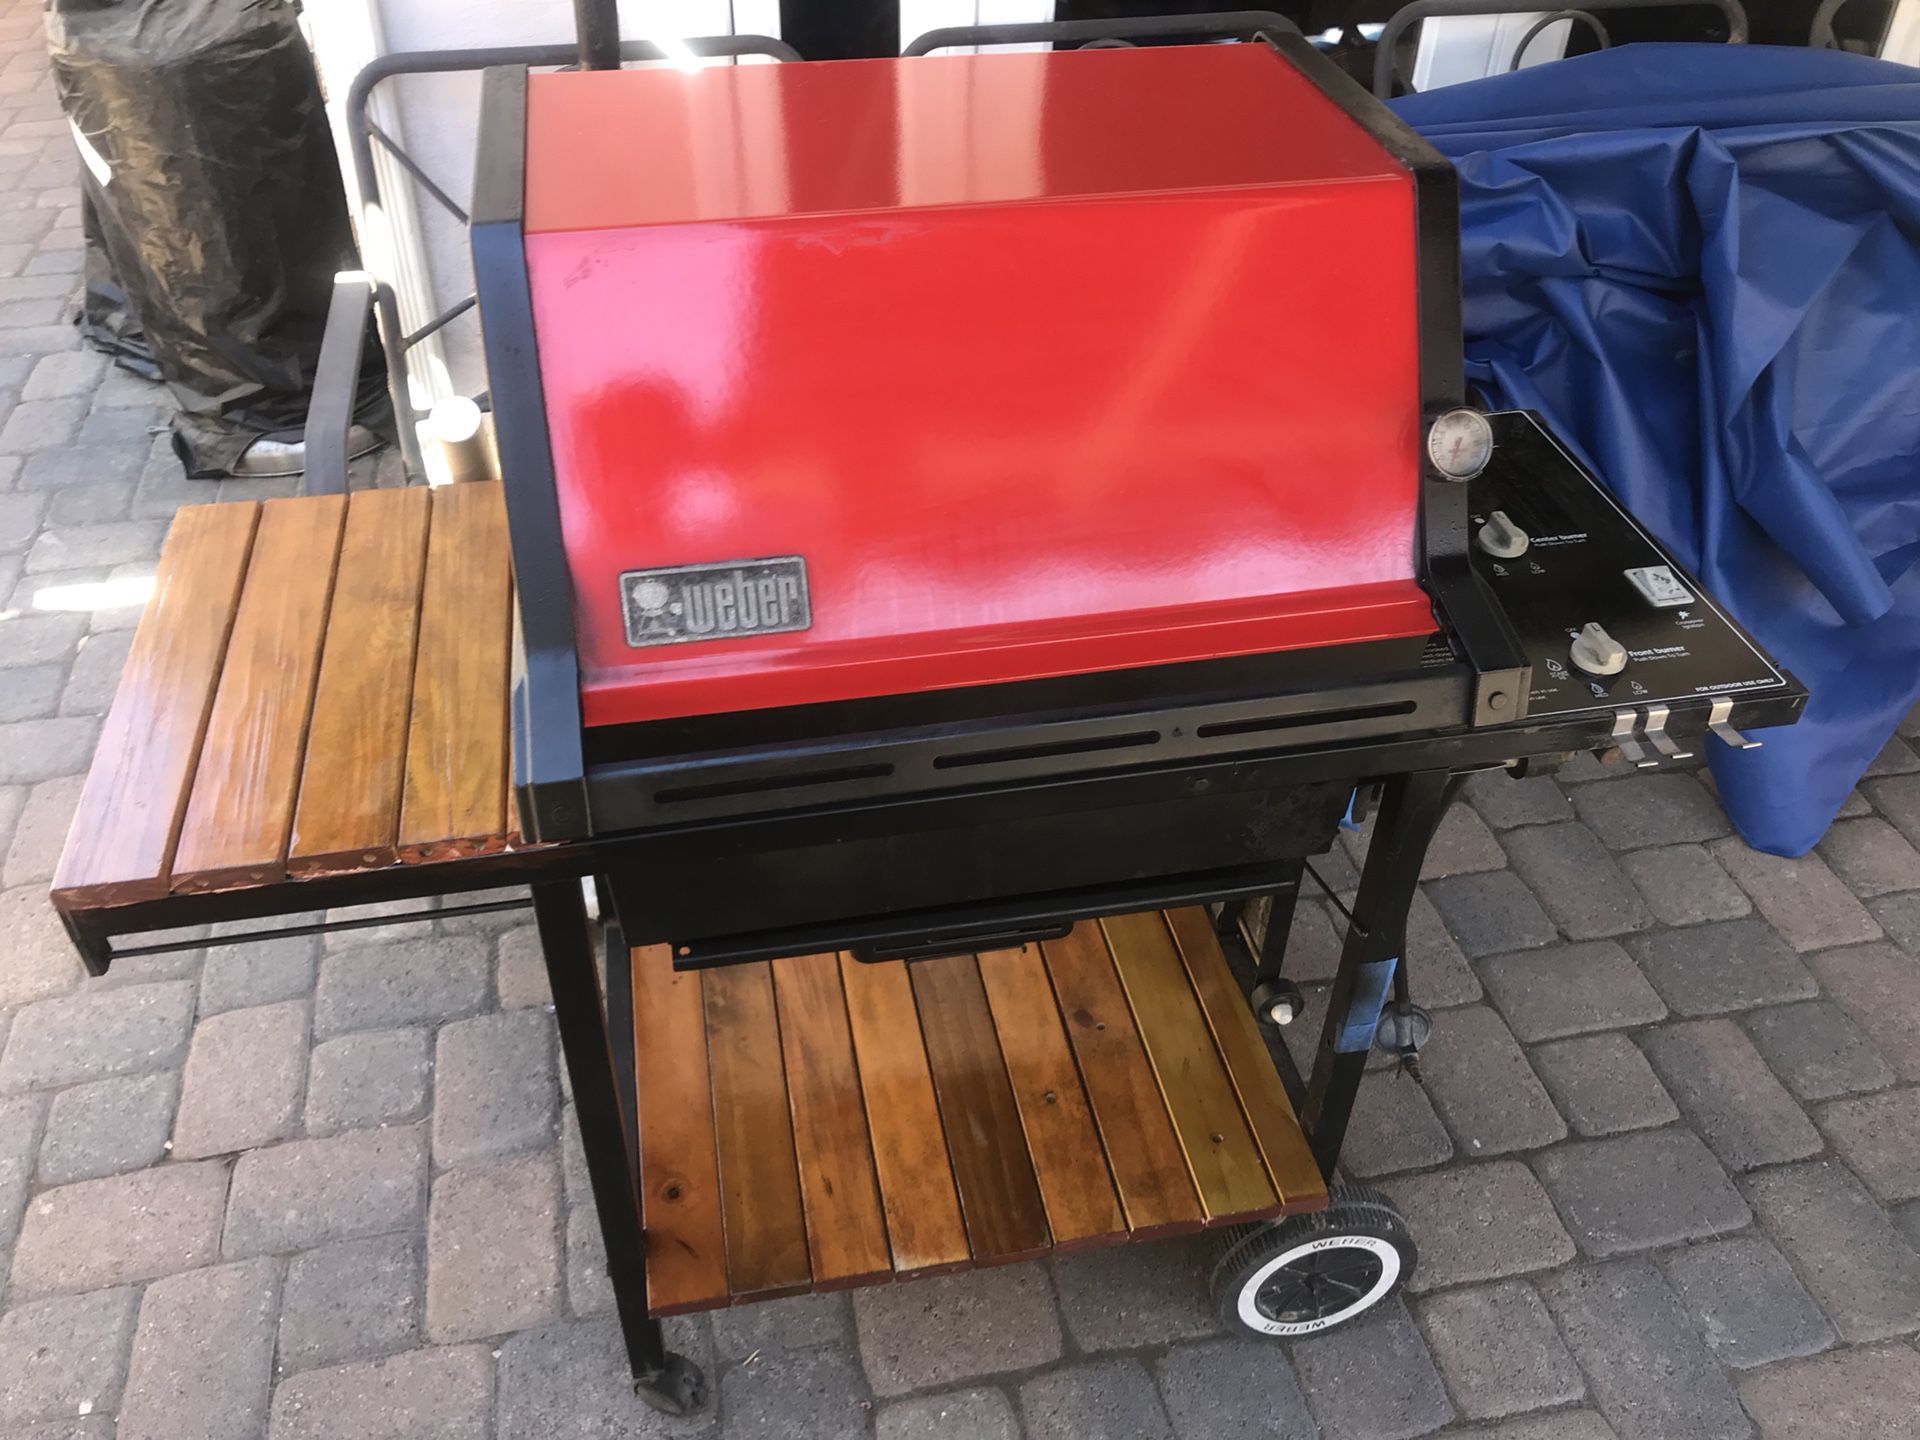 Weber Genesis gas barbecue grill. Model number 8006. Up for grabs, my old Weber Genesis barbecue grill. New, these grills were over $500 each. Built